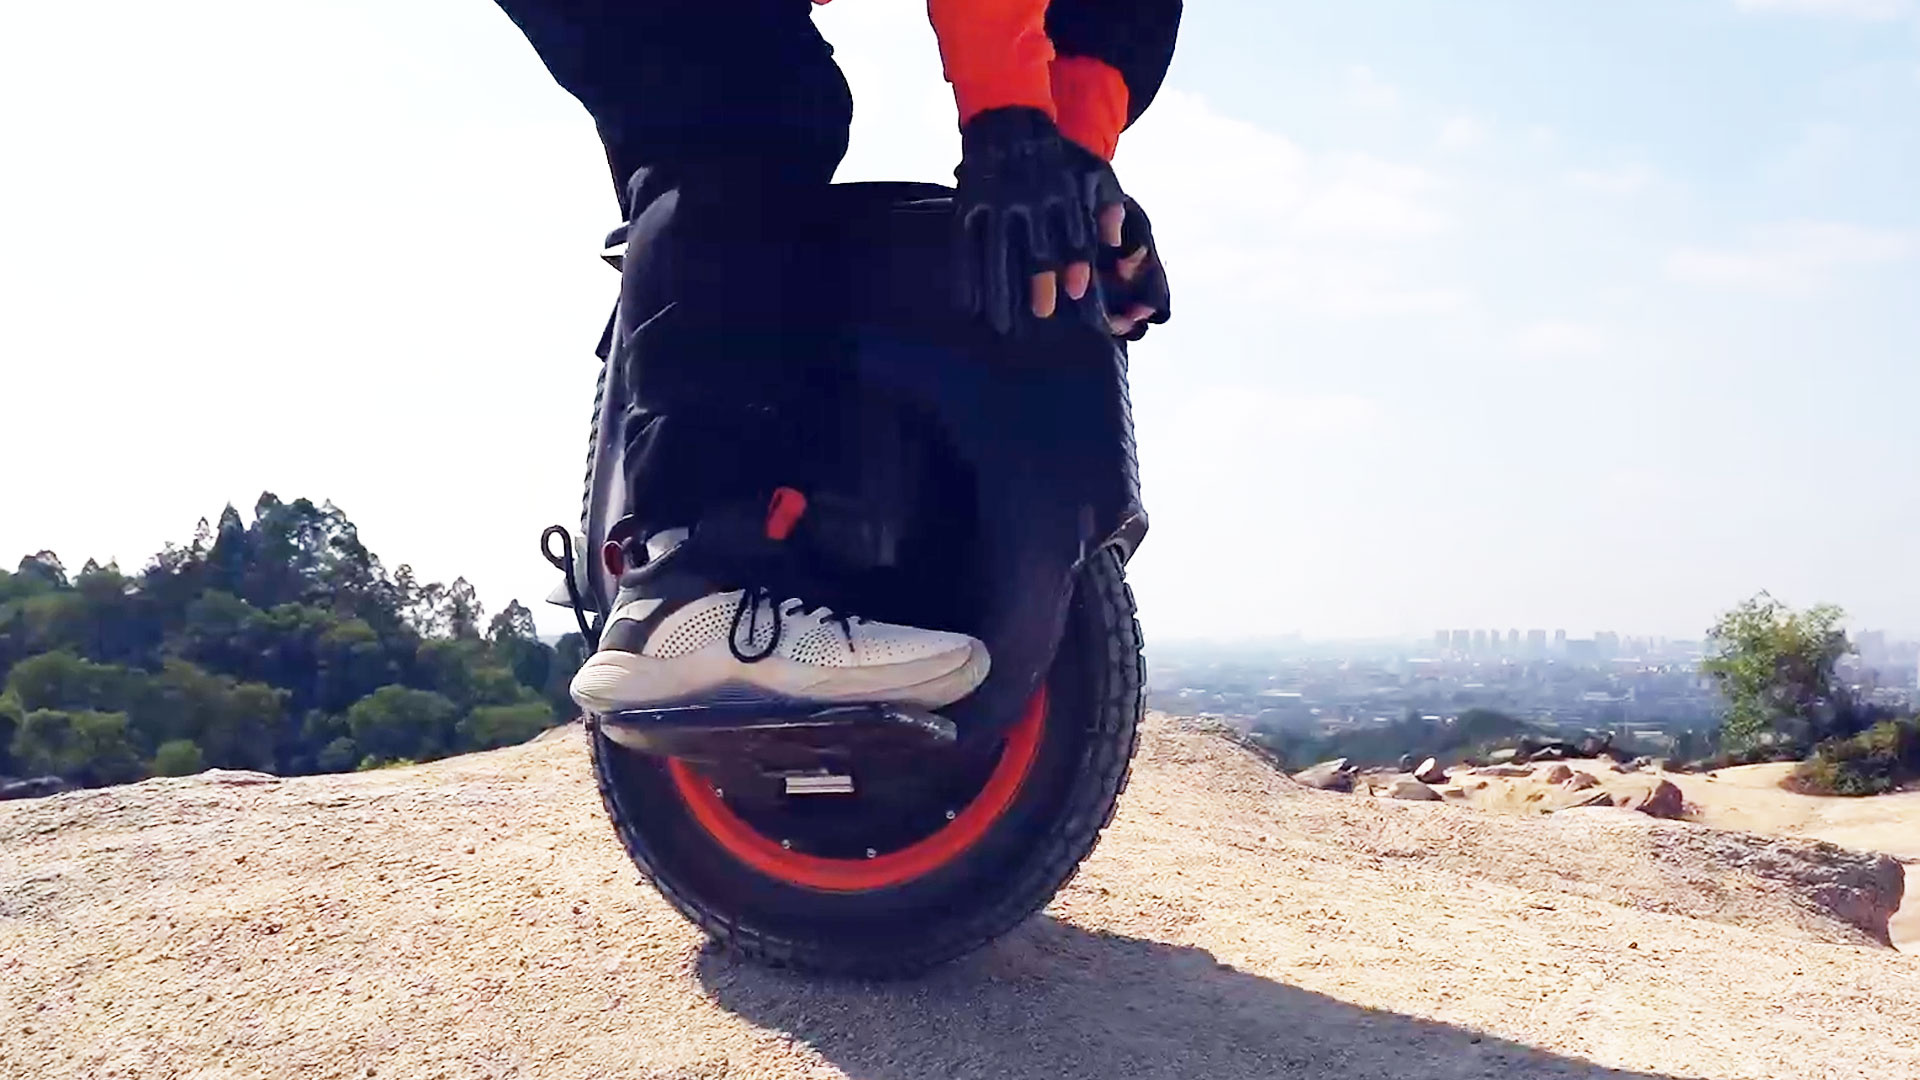 Electric Unicycle, InMotion V12 HT, Best off-road electric unicycle, 1920x1080 Full HD Desktop